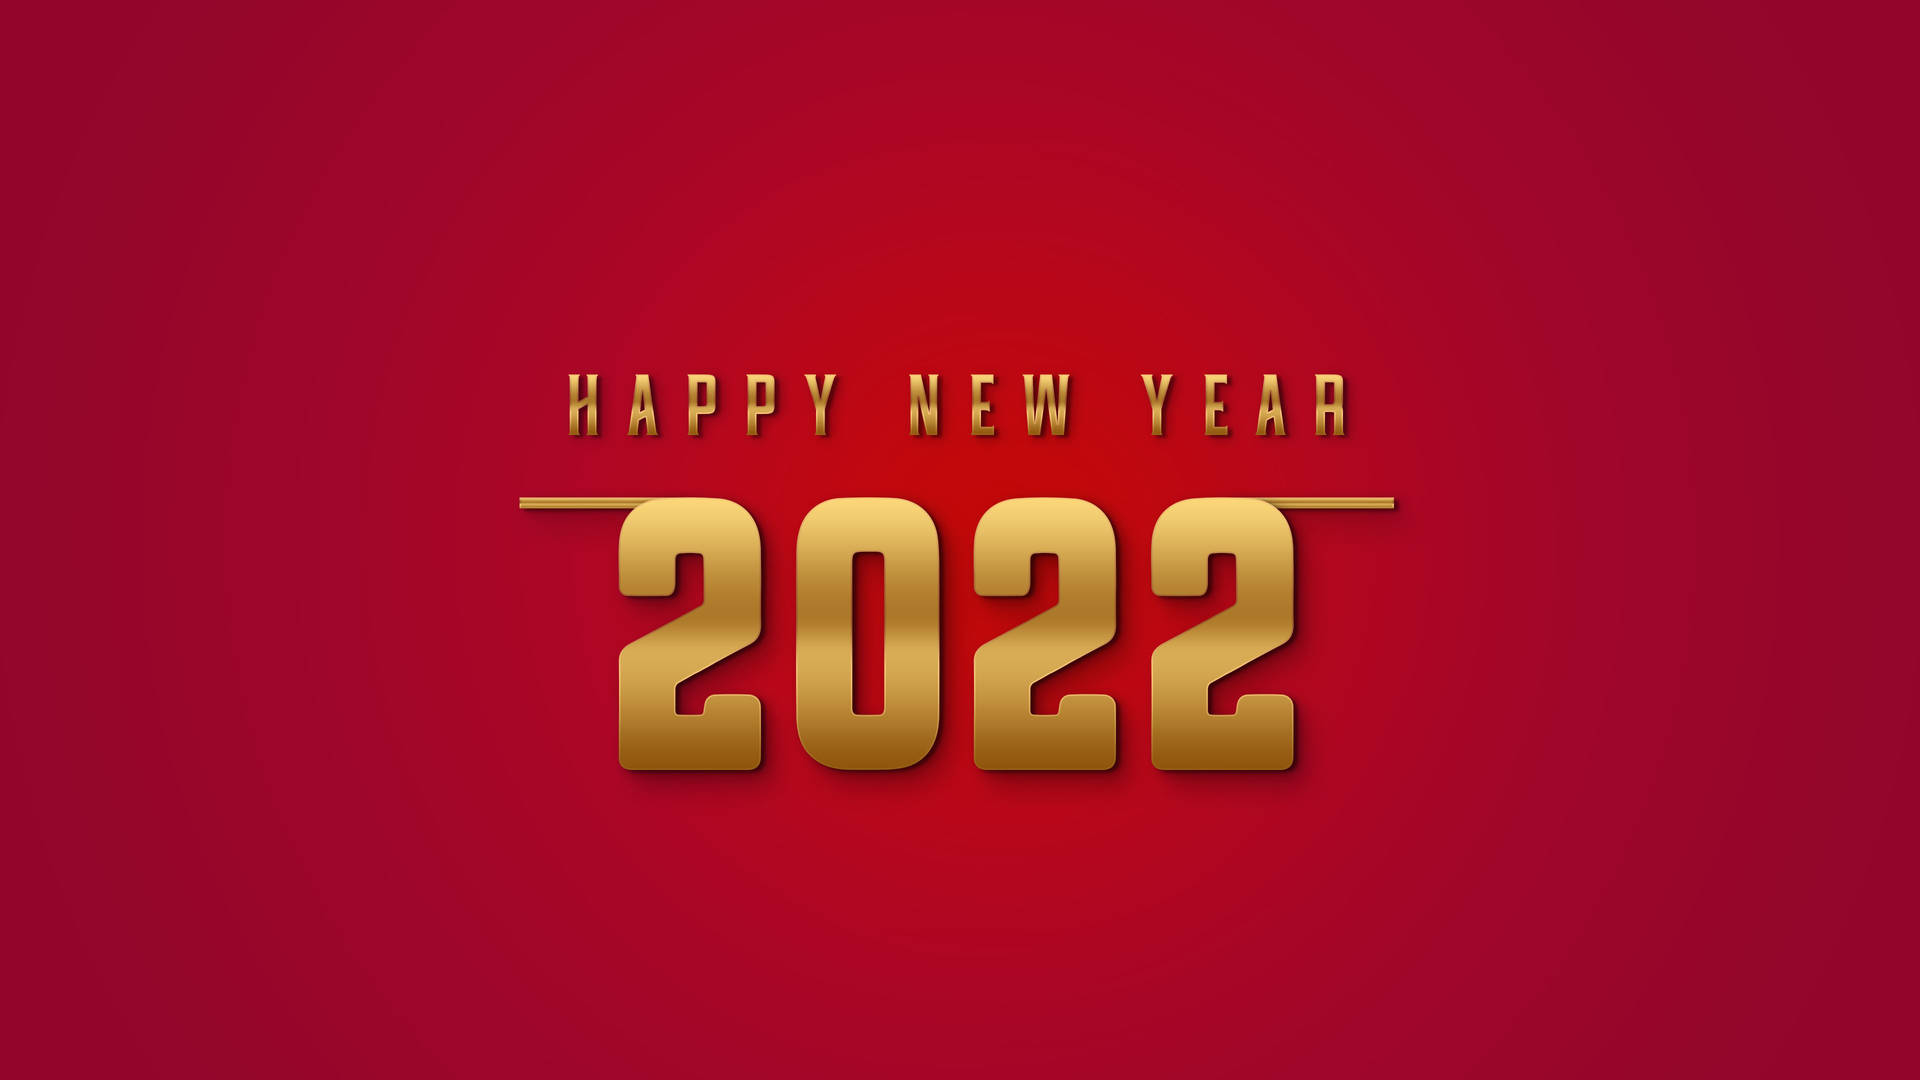 Celebrate Great Beginnings - Happy New Year 2022 Background